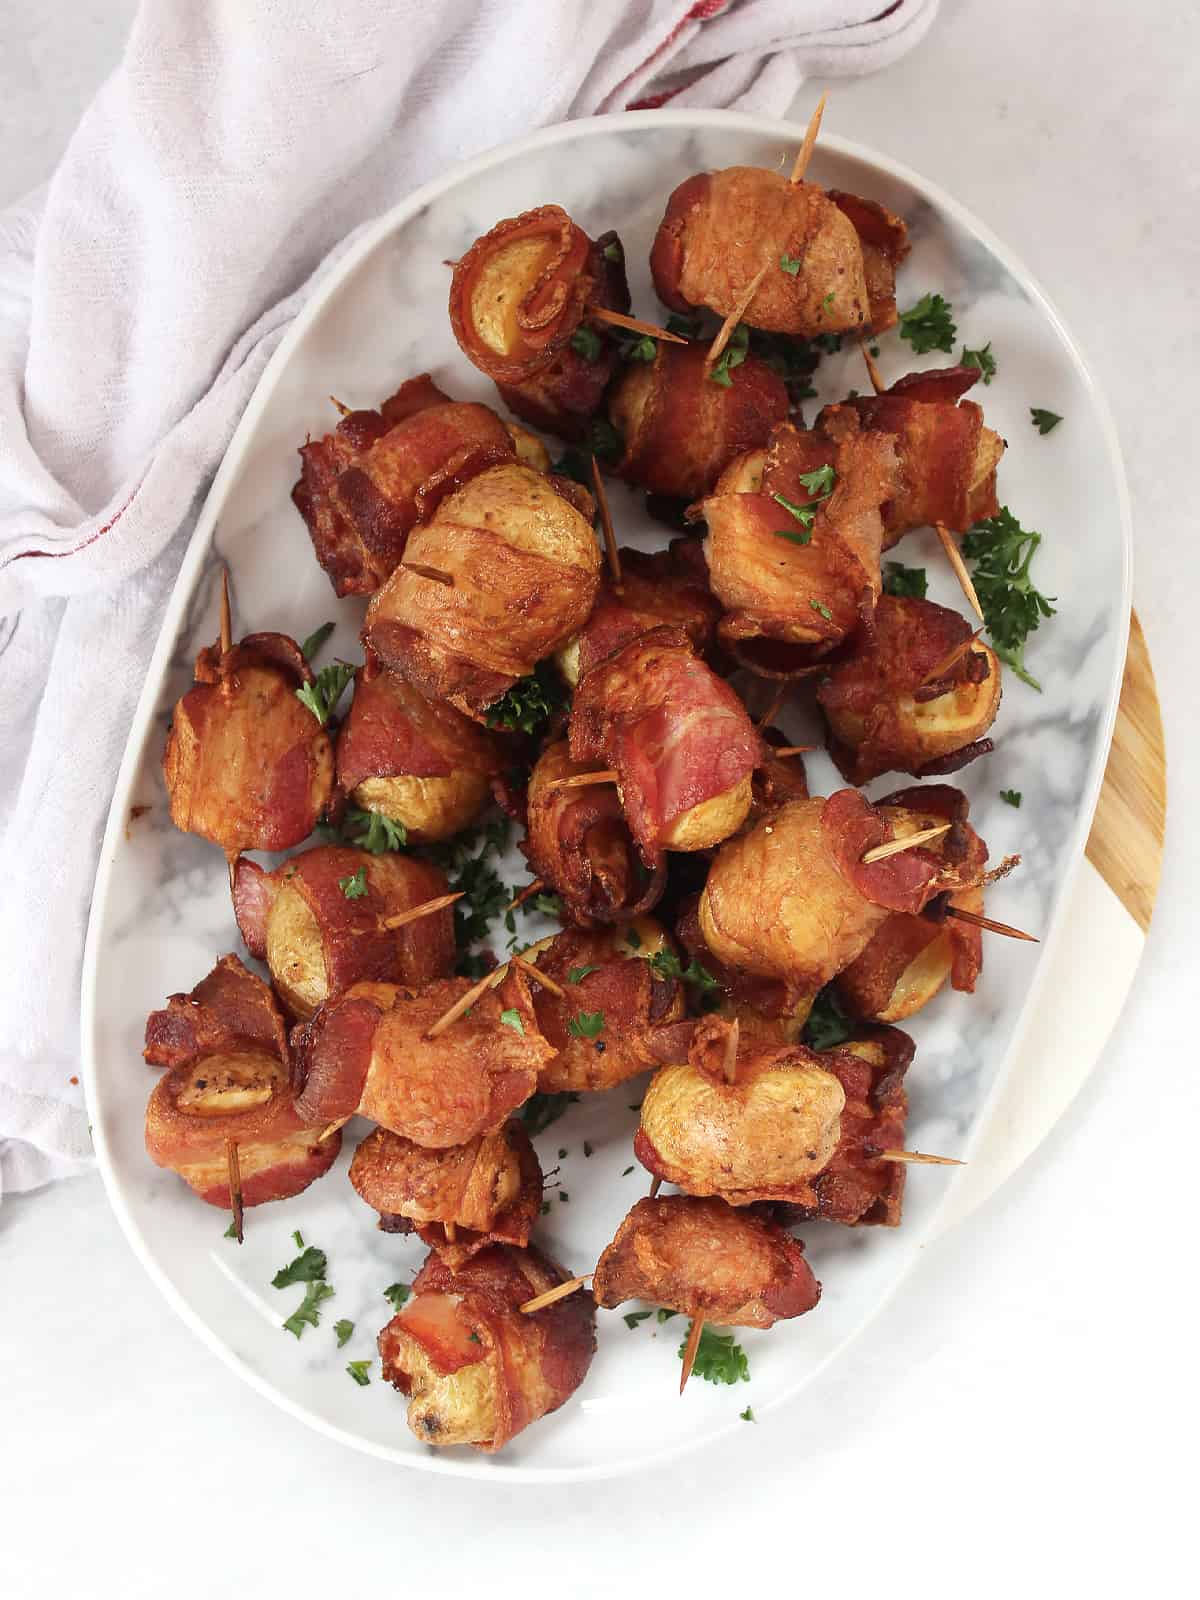 Bacon wrapped potatoes served on a plate with toothpicks as an appetizer.